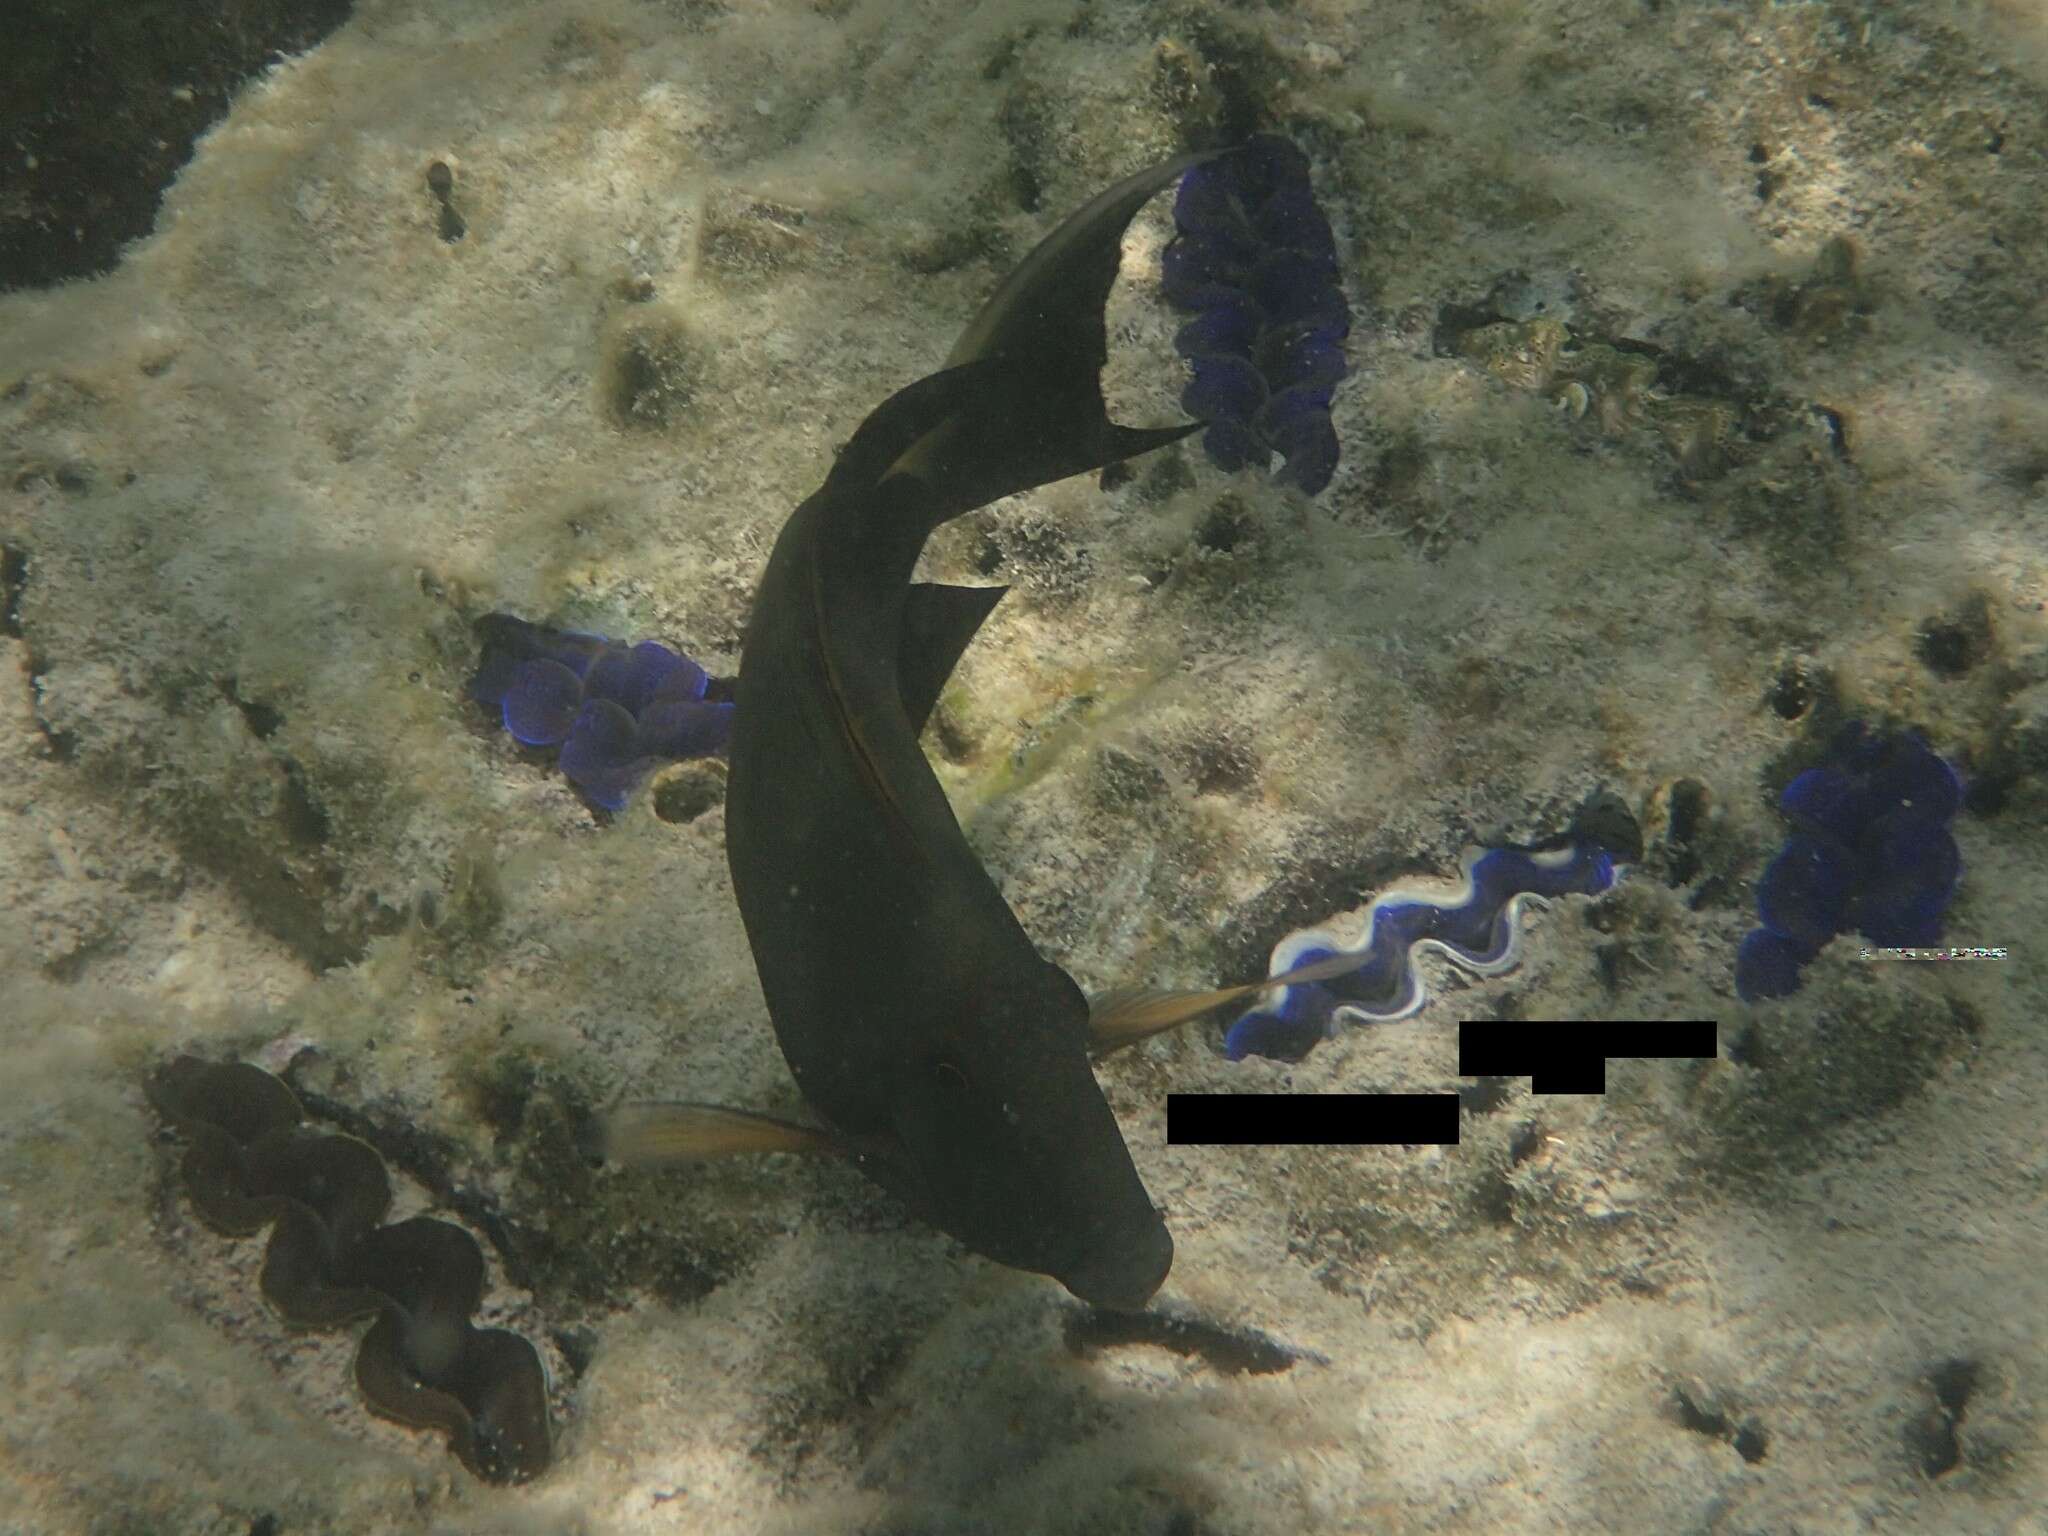 Image of Bristle-toothed Surgeonfish